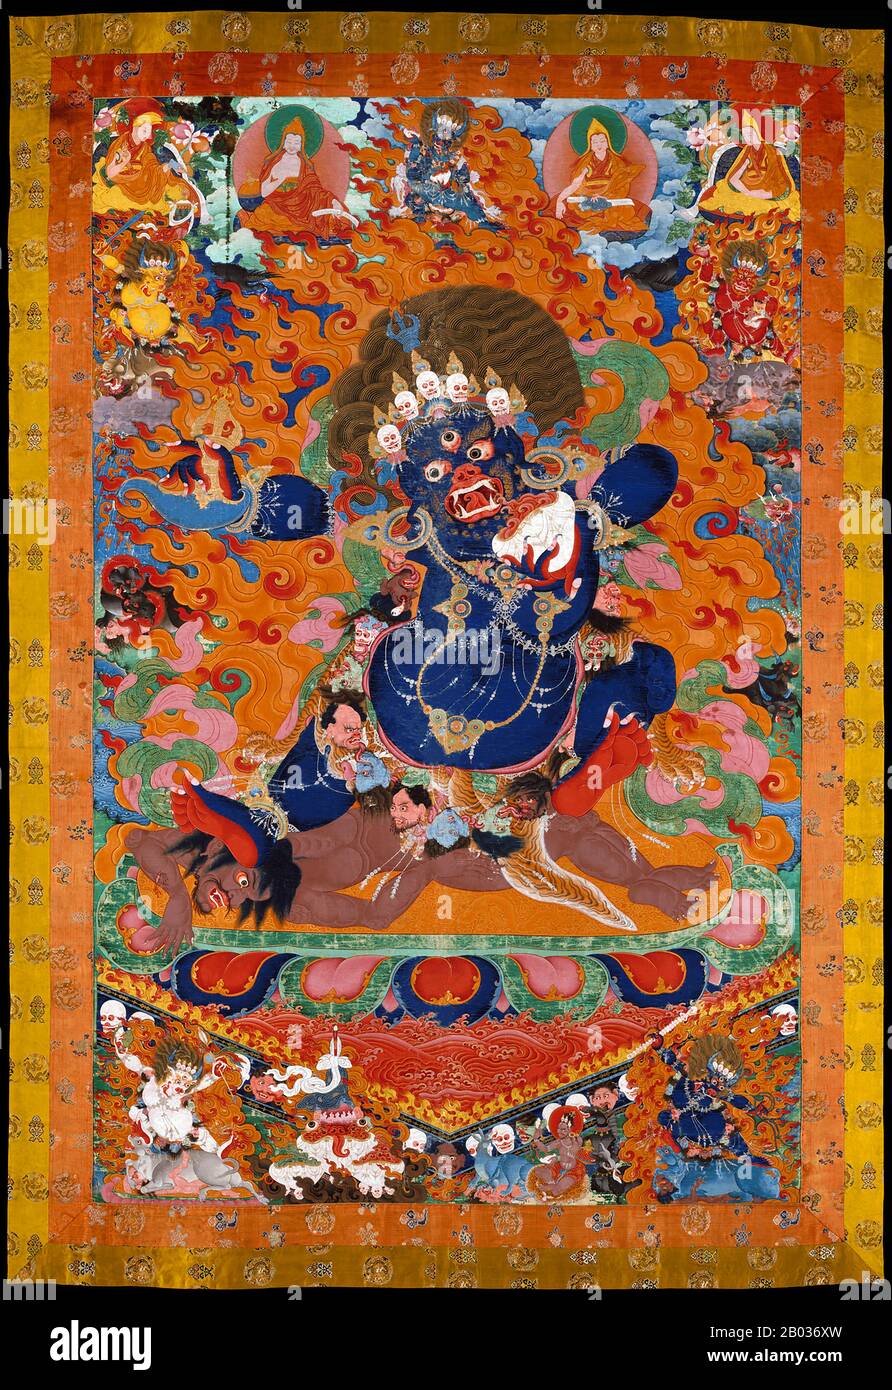 In East Asian mythology, Yama is a dharmapala (wrathful god) and King of Hell. It is his duty to judge the dead and rule over the various hells and purgatories, presiding over the cycle of samsara (cyclic, circuitous change). Yama has spread from being a Hindu god to finding roles in Buddhism as well as in Chinese, Korean and Japanese mythology.  Yama's role in Theravada Buddhism is vague and not well defined, though he is still a caretaker of hell and the dead. He judges those who die to determine if they are to be reborn to earth, to the heavens or to the hells. Sometimes there are more than Stock Photo